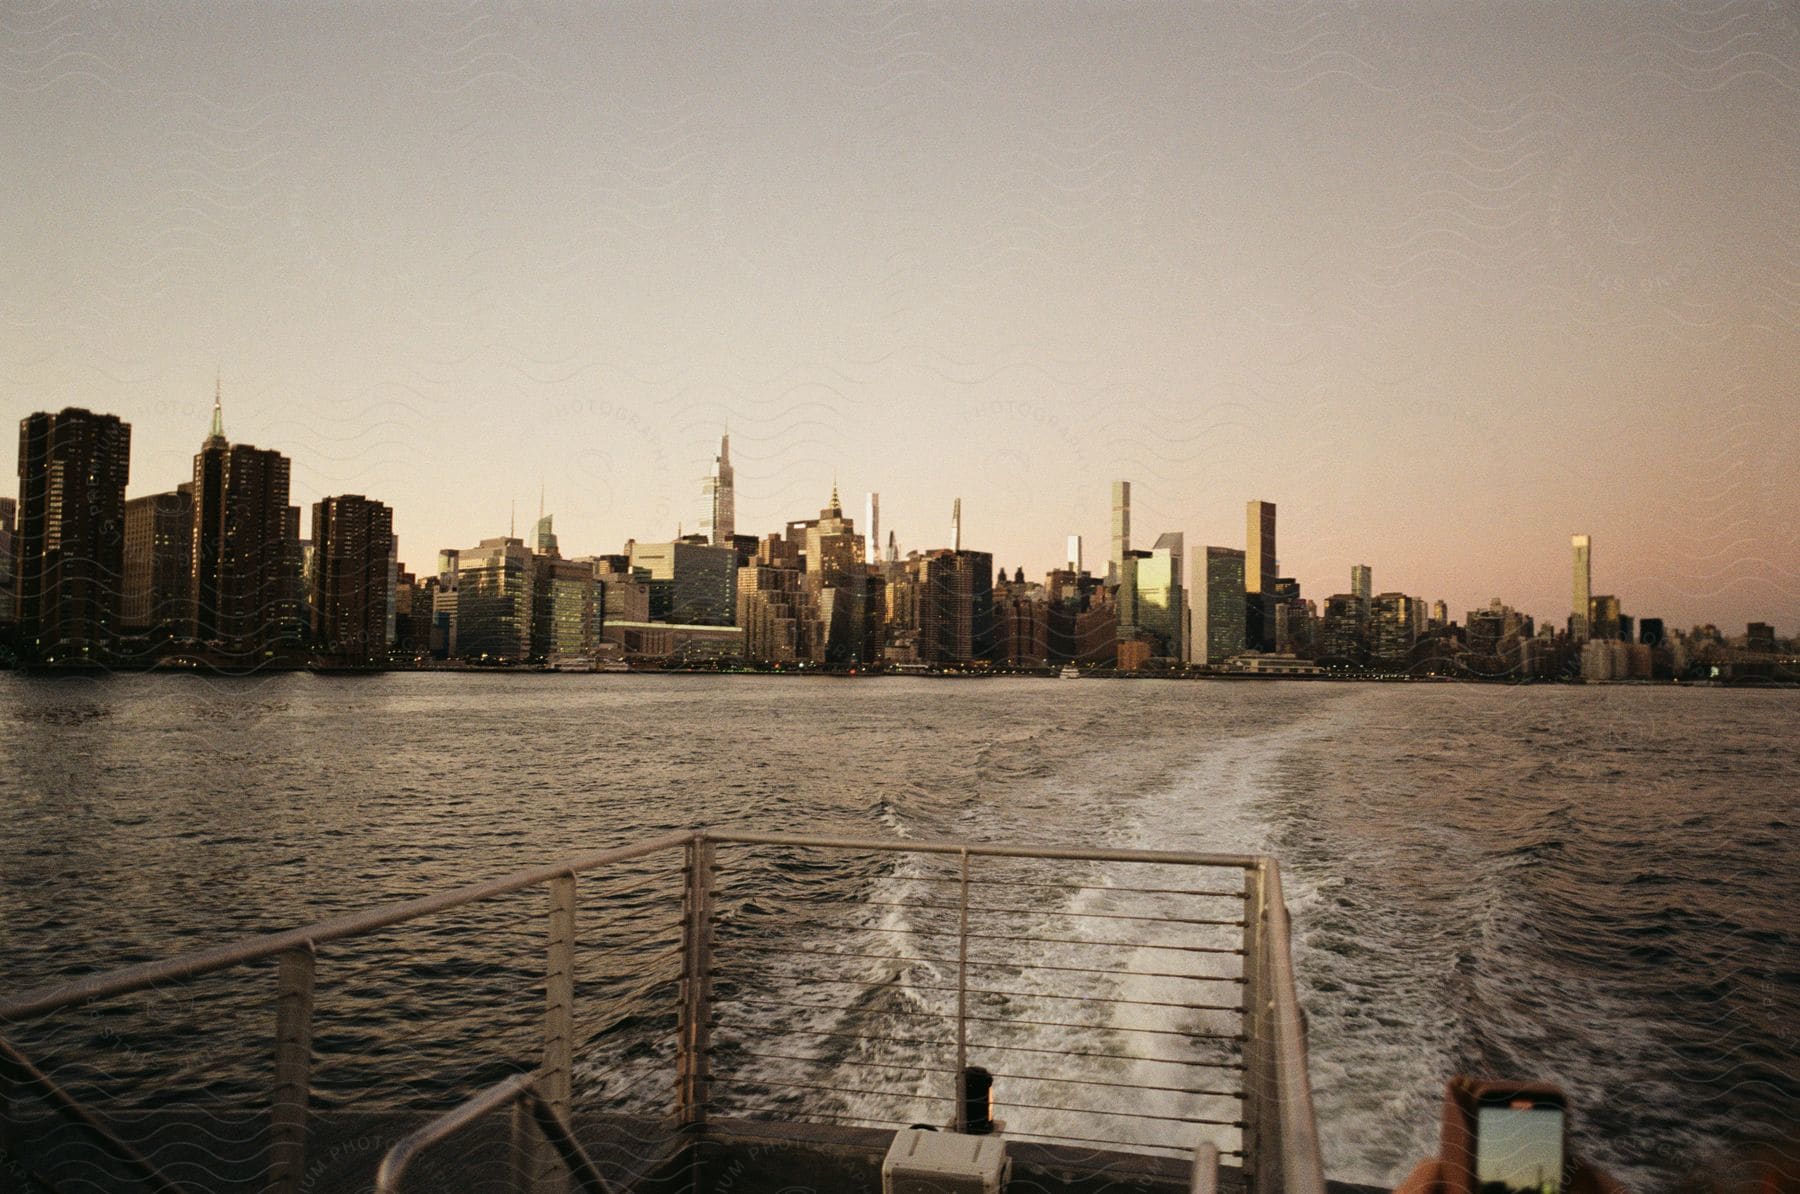 A boat moves through a city with tall buildings in the background